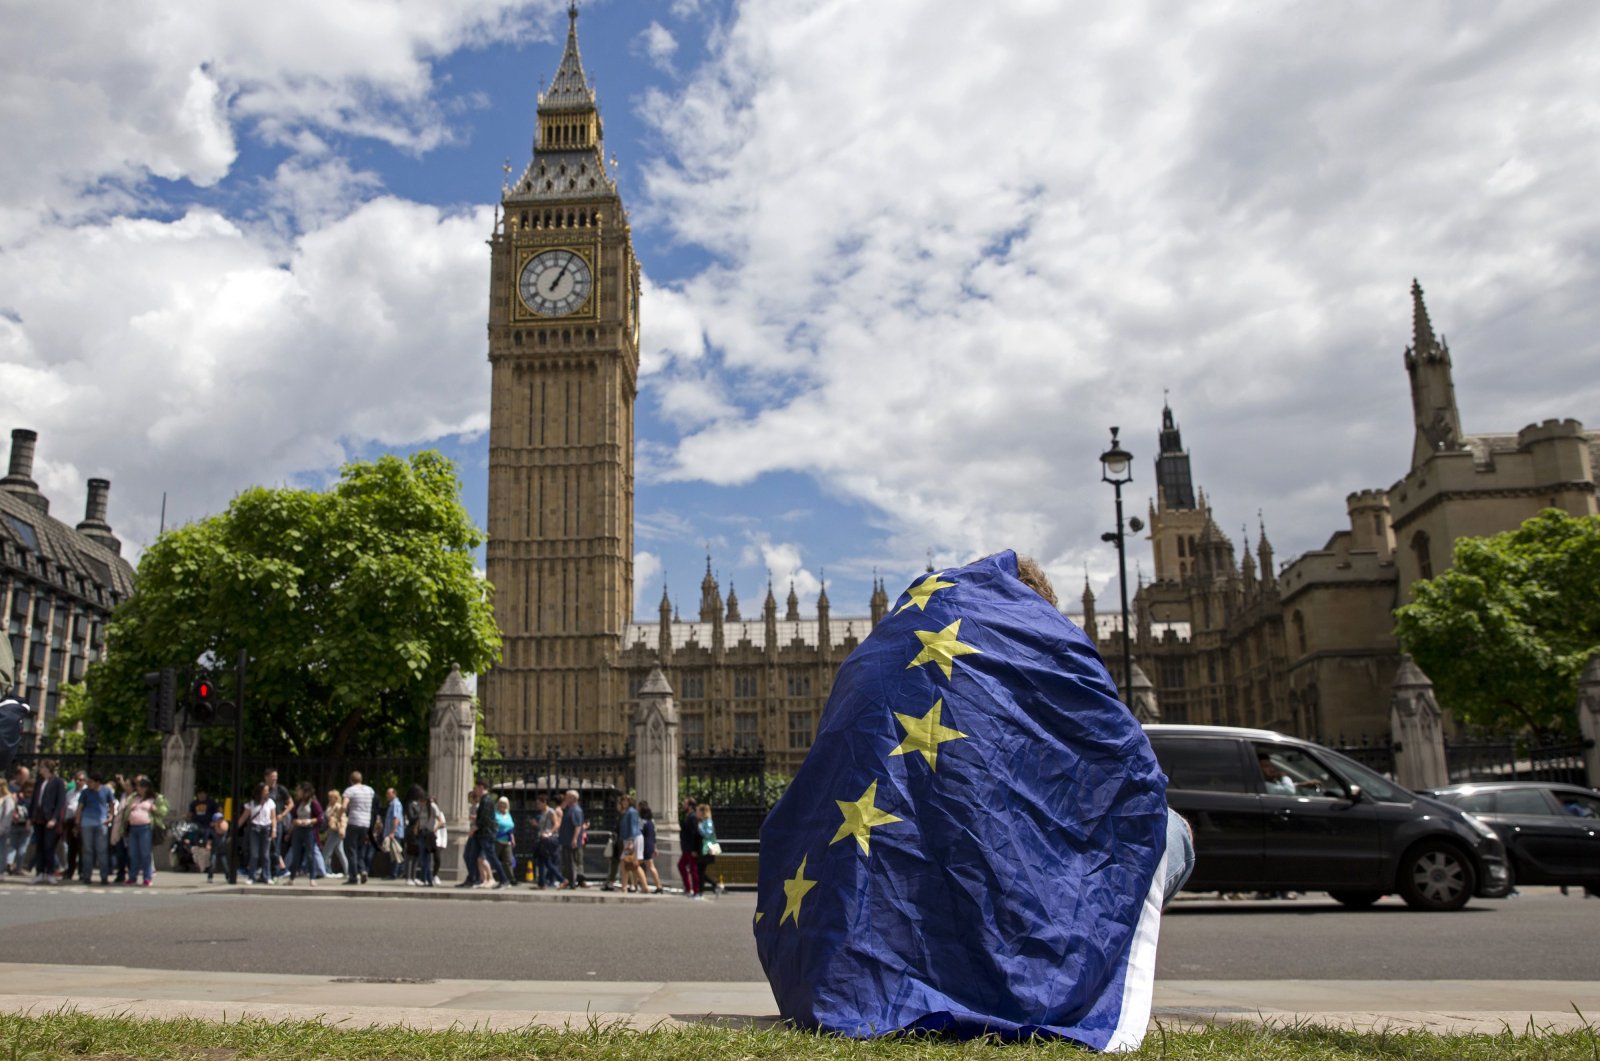 A demonstrator draped in a European Union flag sits on the ground during a protest against the outcome of the U.K.'s June 23 referendum on the EU, in central London, Britain, June 25, 2016. (AFP Photo)